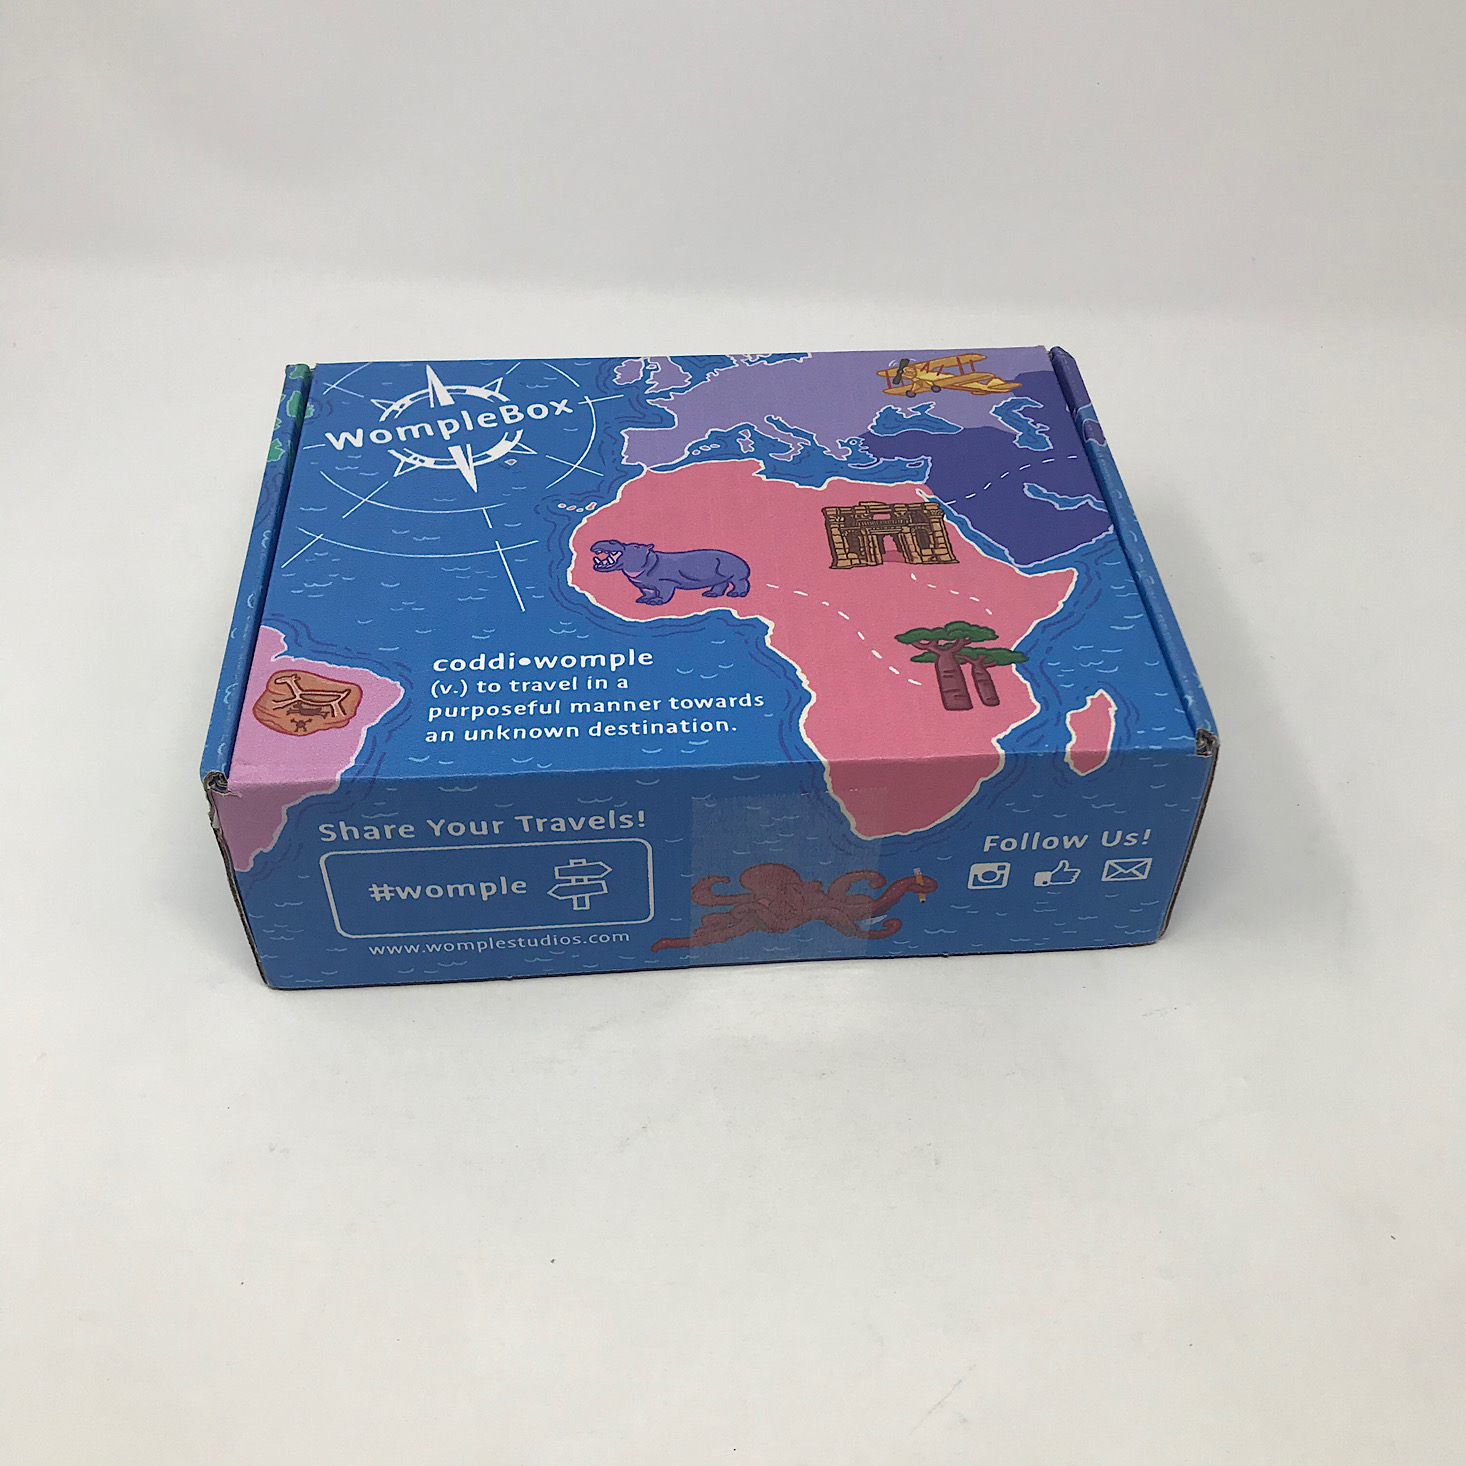 WompleMail “Sri Lanka” Box Review + Coupon – March 2020